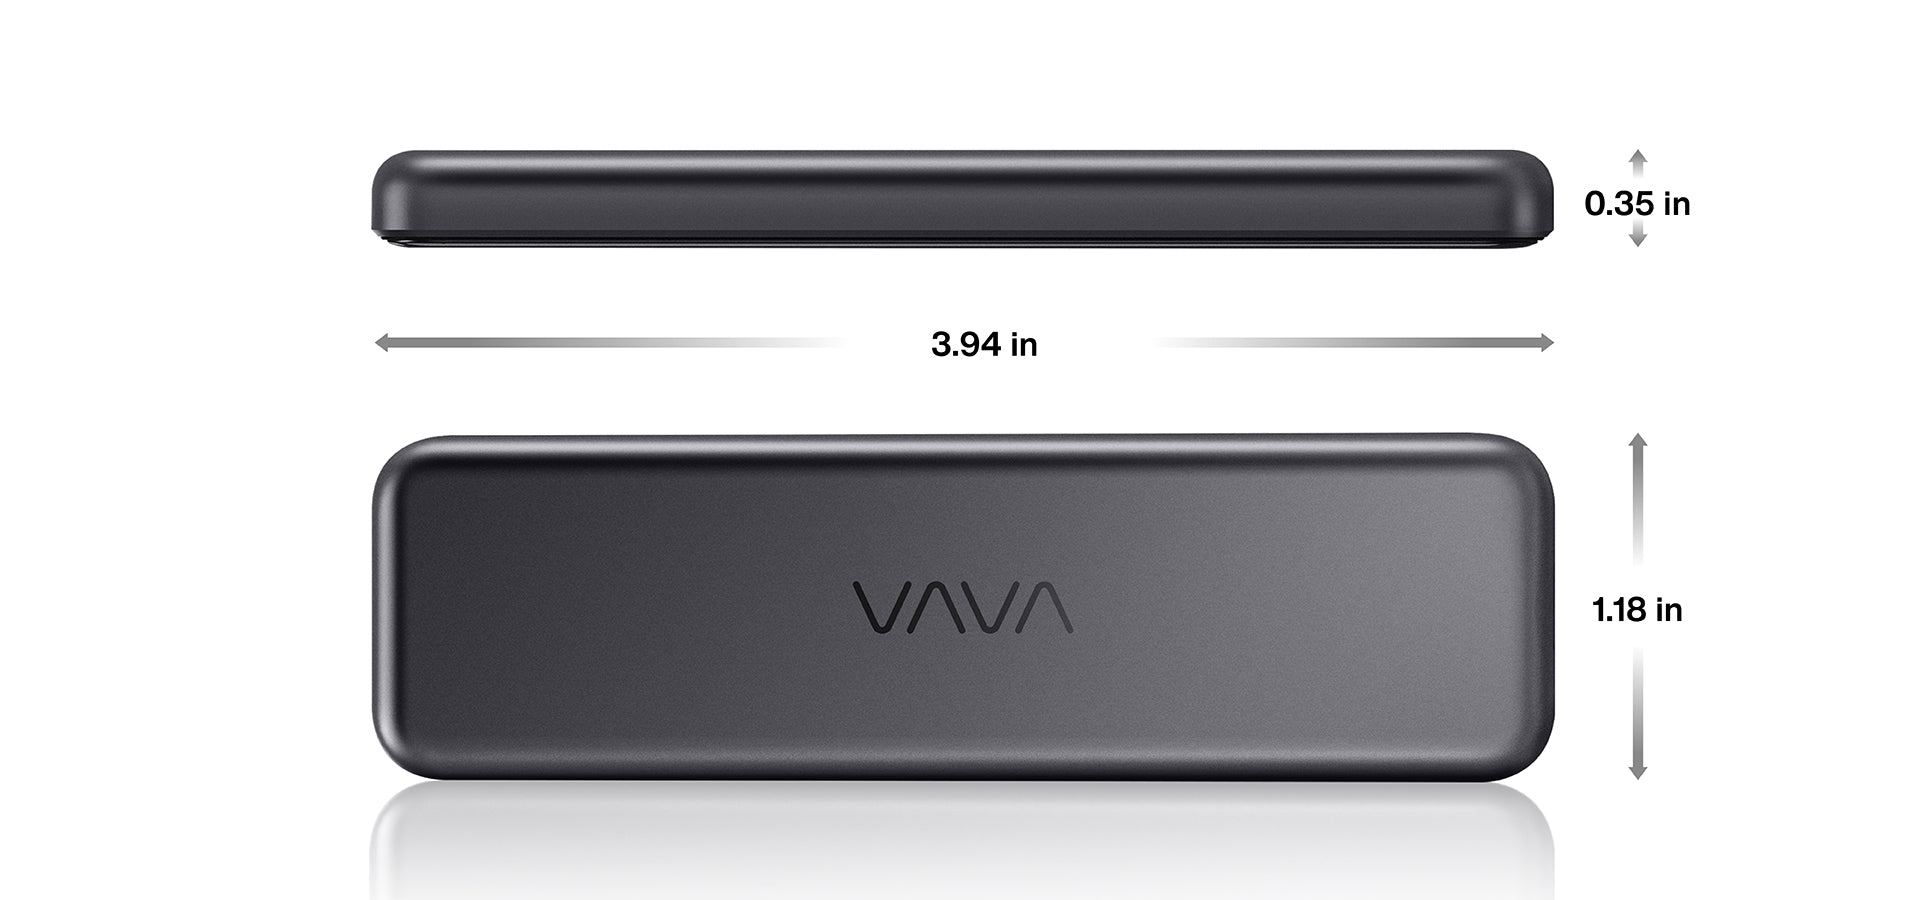 VAVA portable SSD depicting the product dimensions